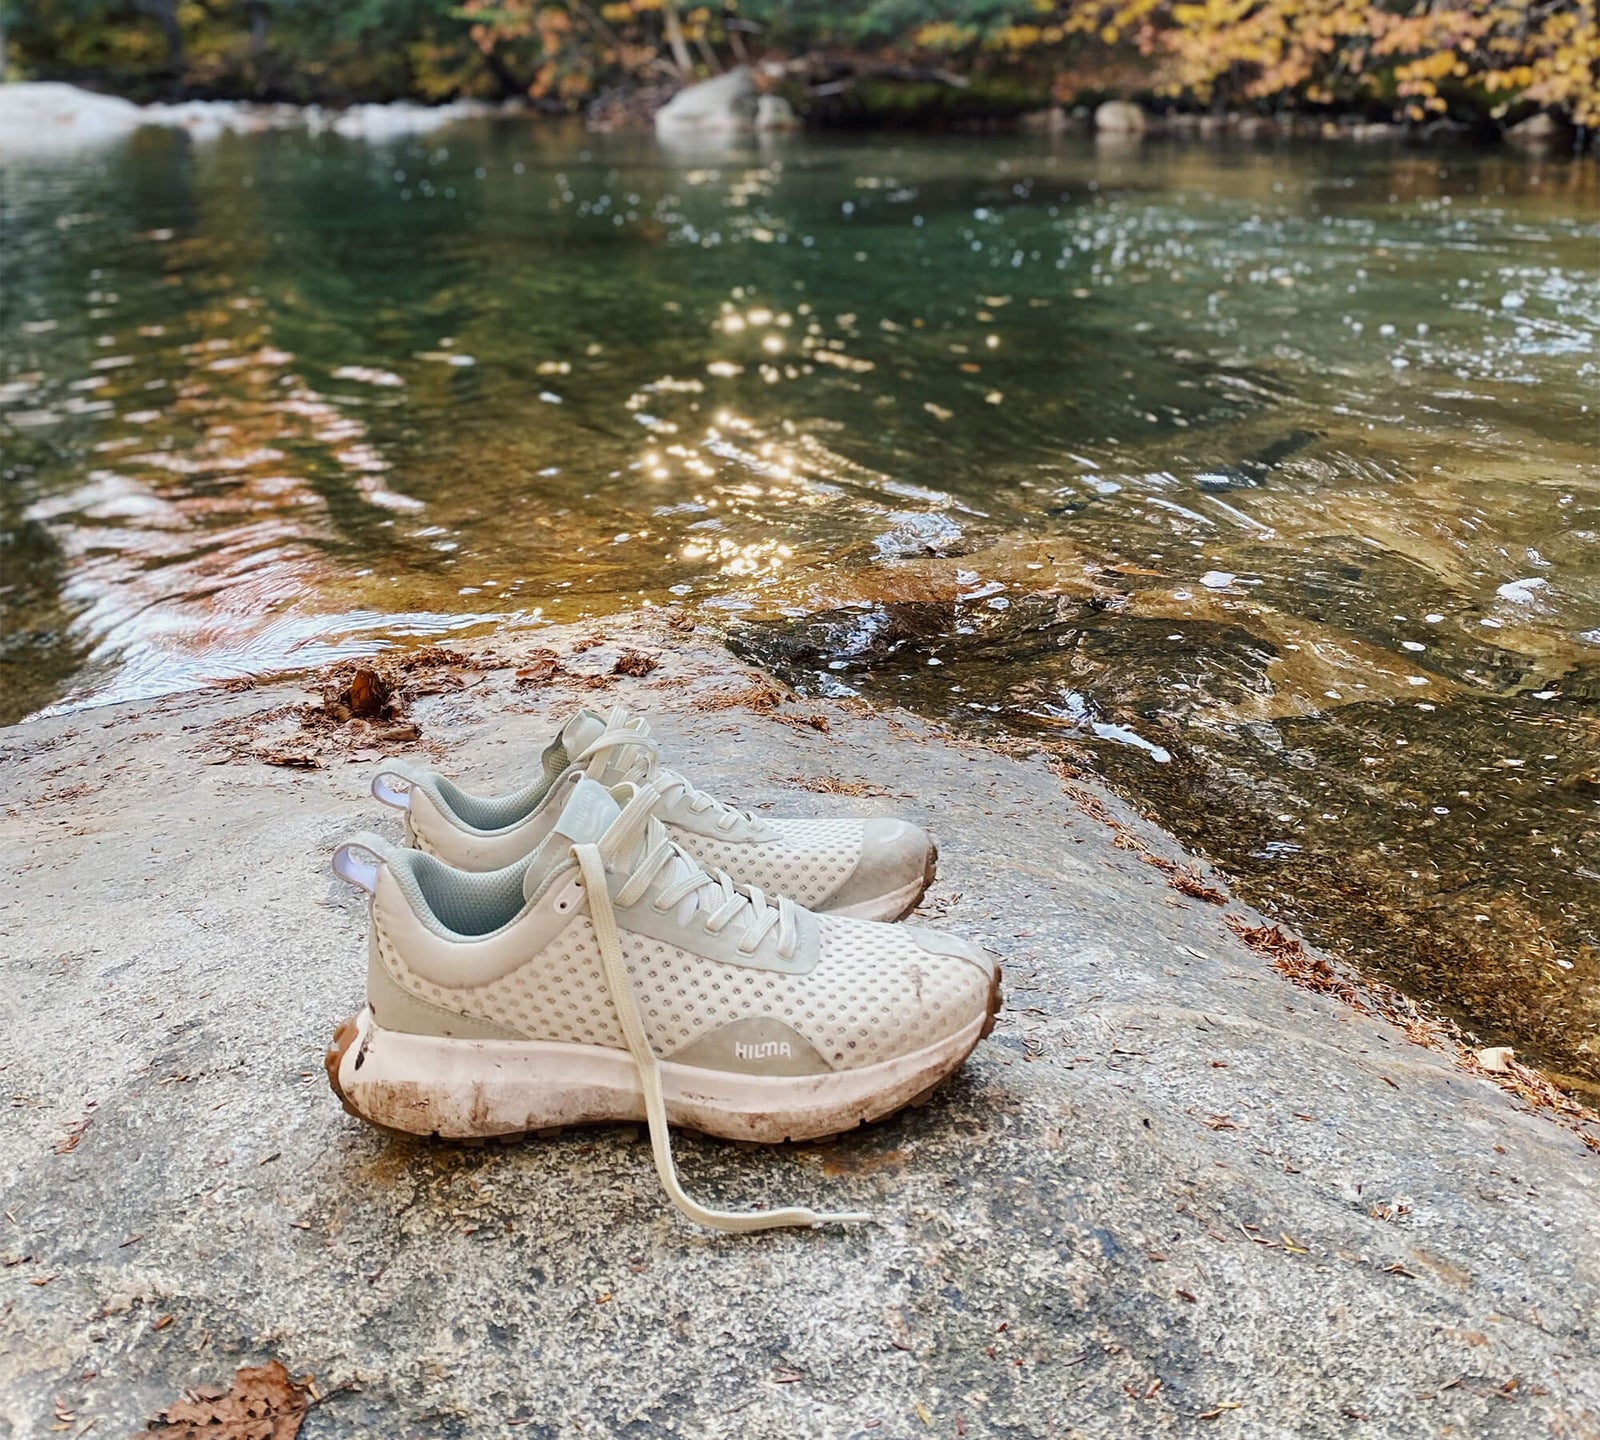 A pair of the Everywhere Frozen Dew Hilma Running shoes on a rock near a body of water